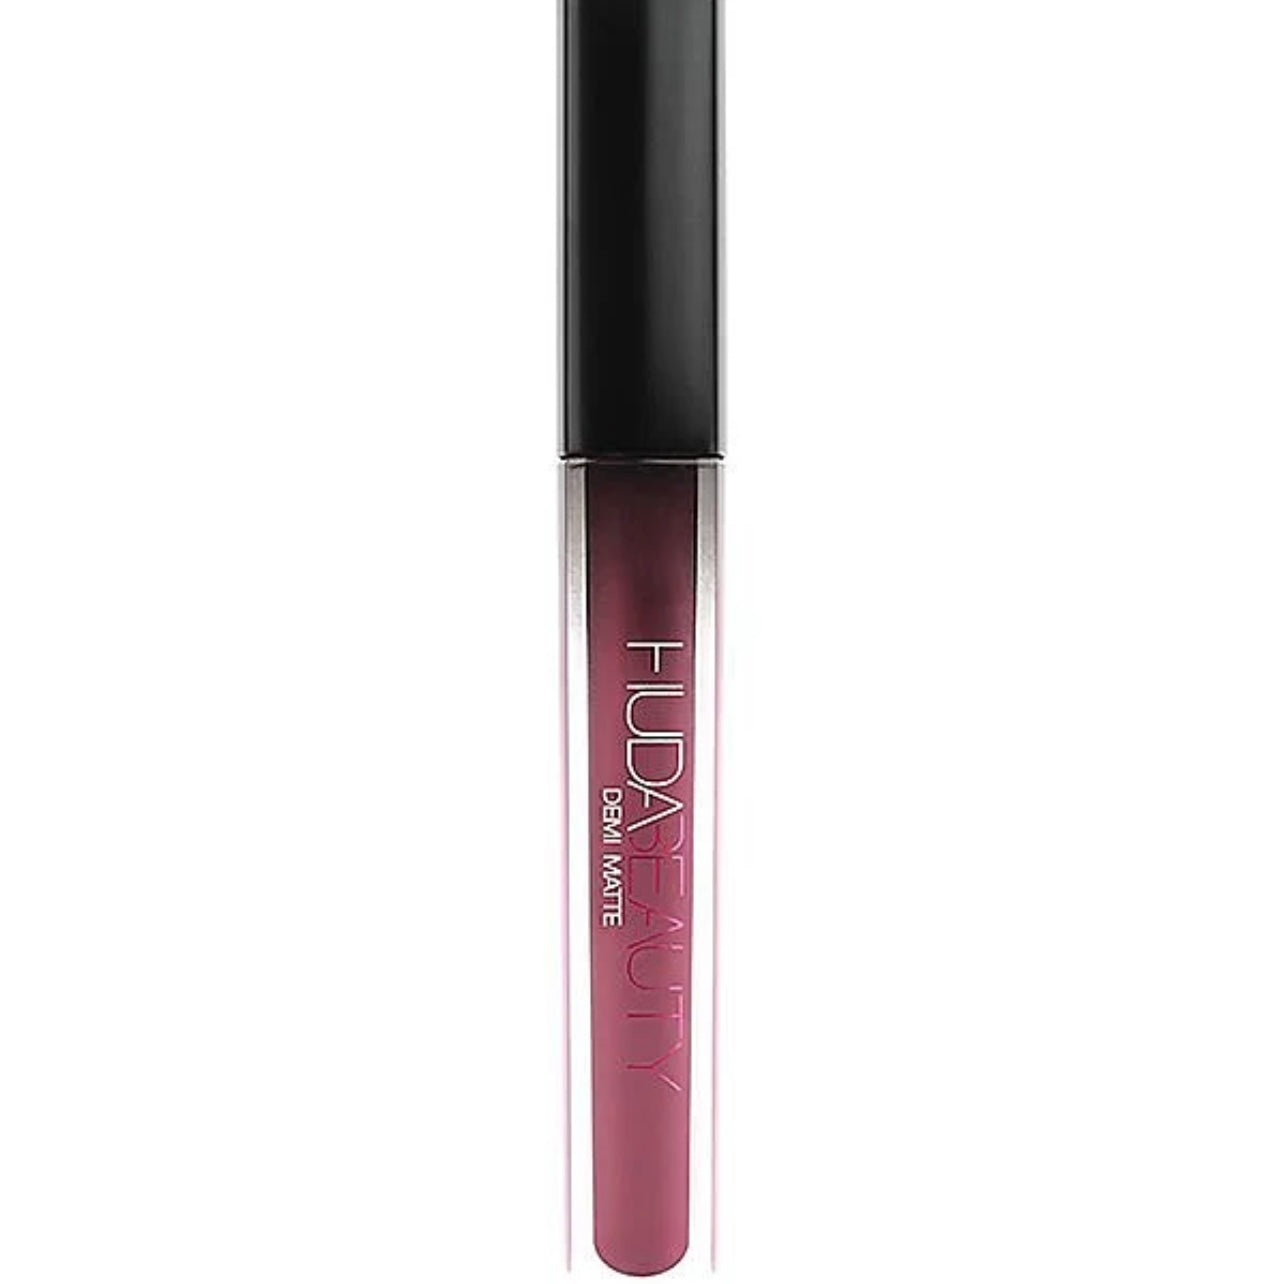 Huda Beauty Demi-Matte Cream Lip Color In “Catwalk Killa”Only Found at FaceTreasures Luxury Boutique & Monthly Boxes go to FaceTreasures.Com for all your premium beauty & skincare needs